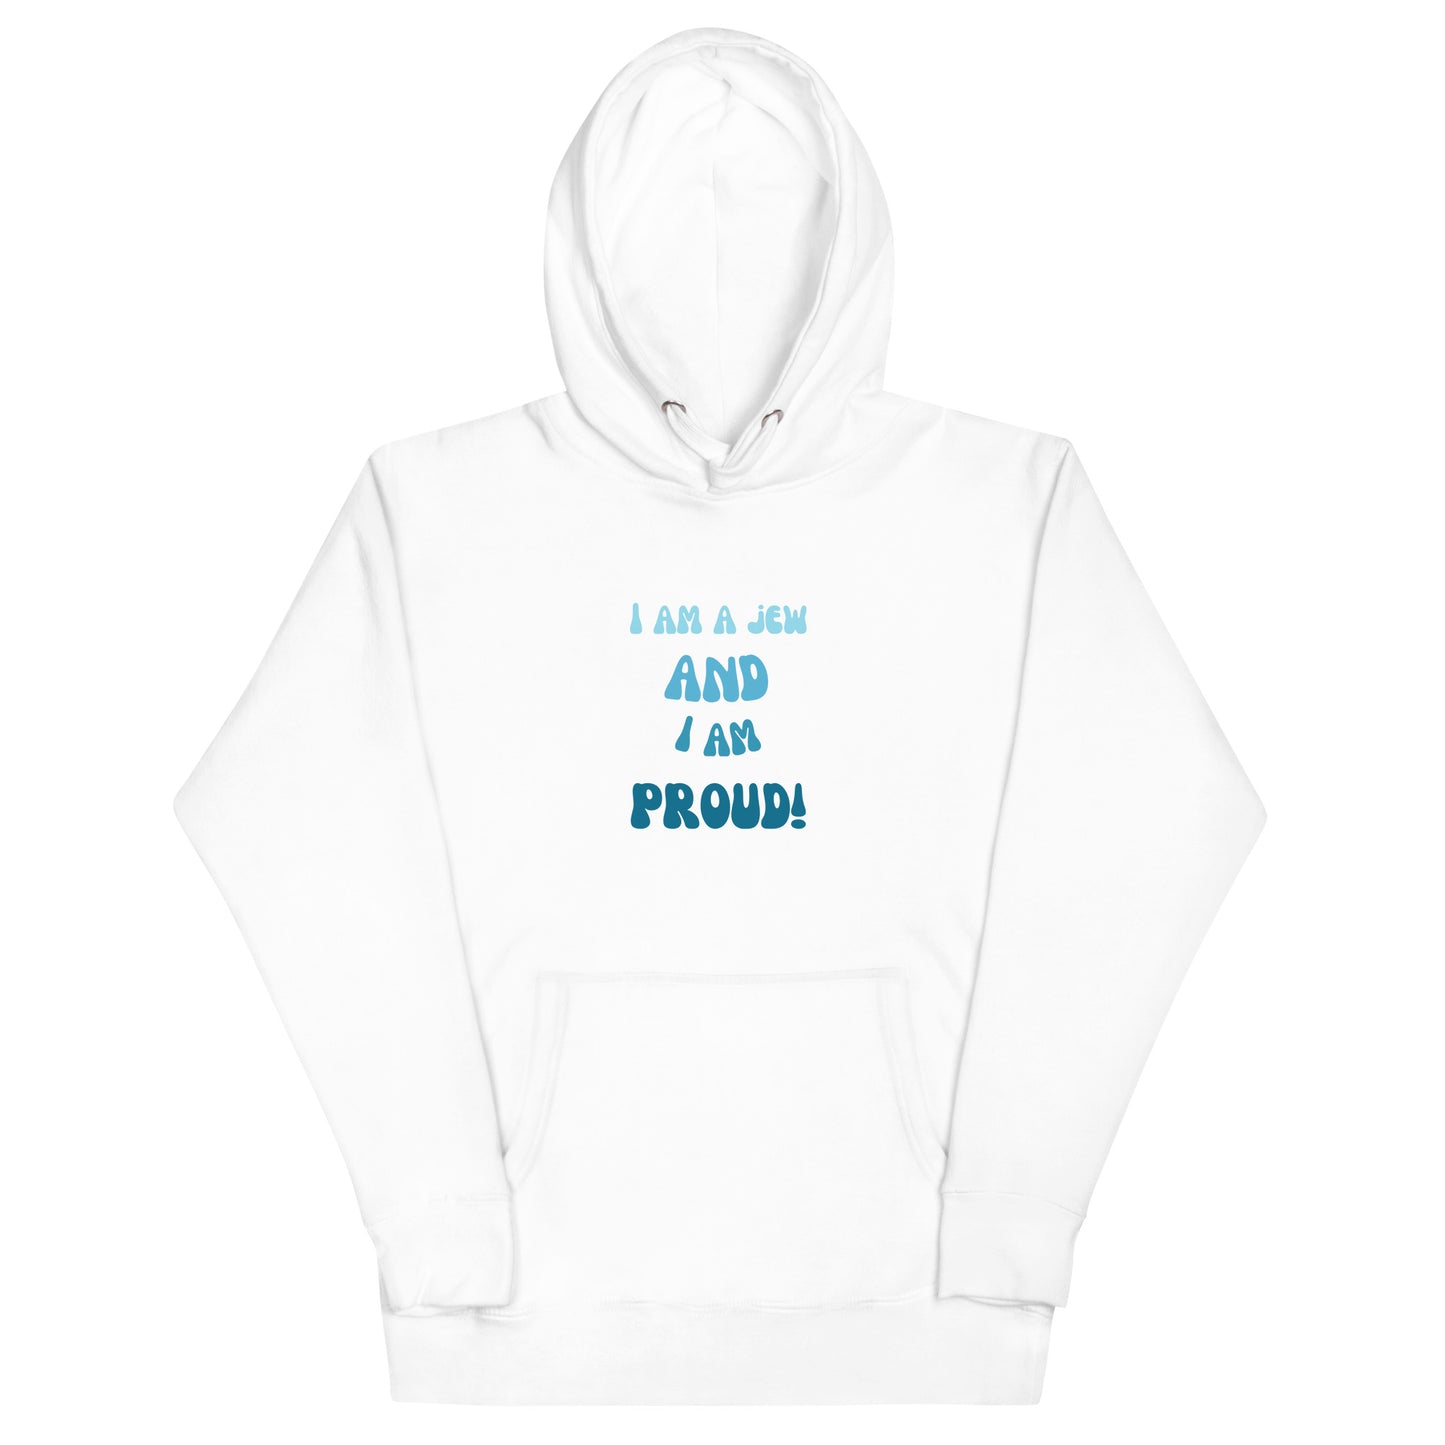 I'm a jew and i'm proud - Unisex Hoodie (6 colors)